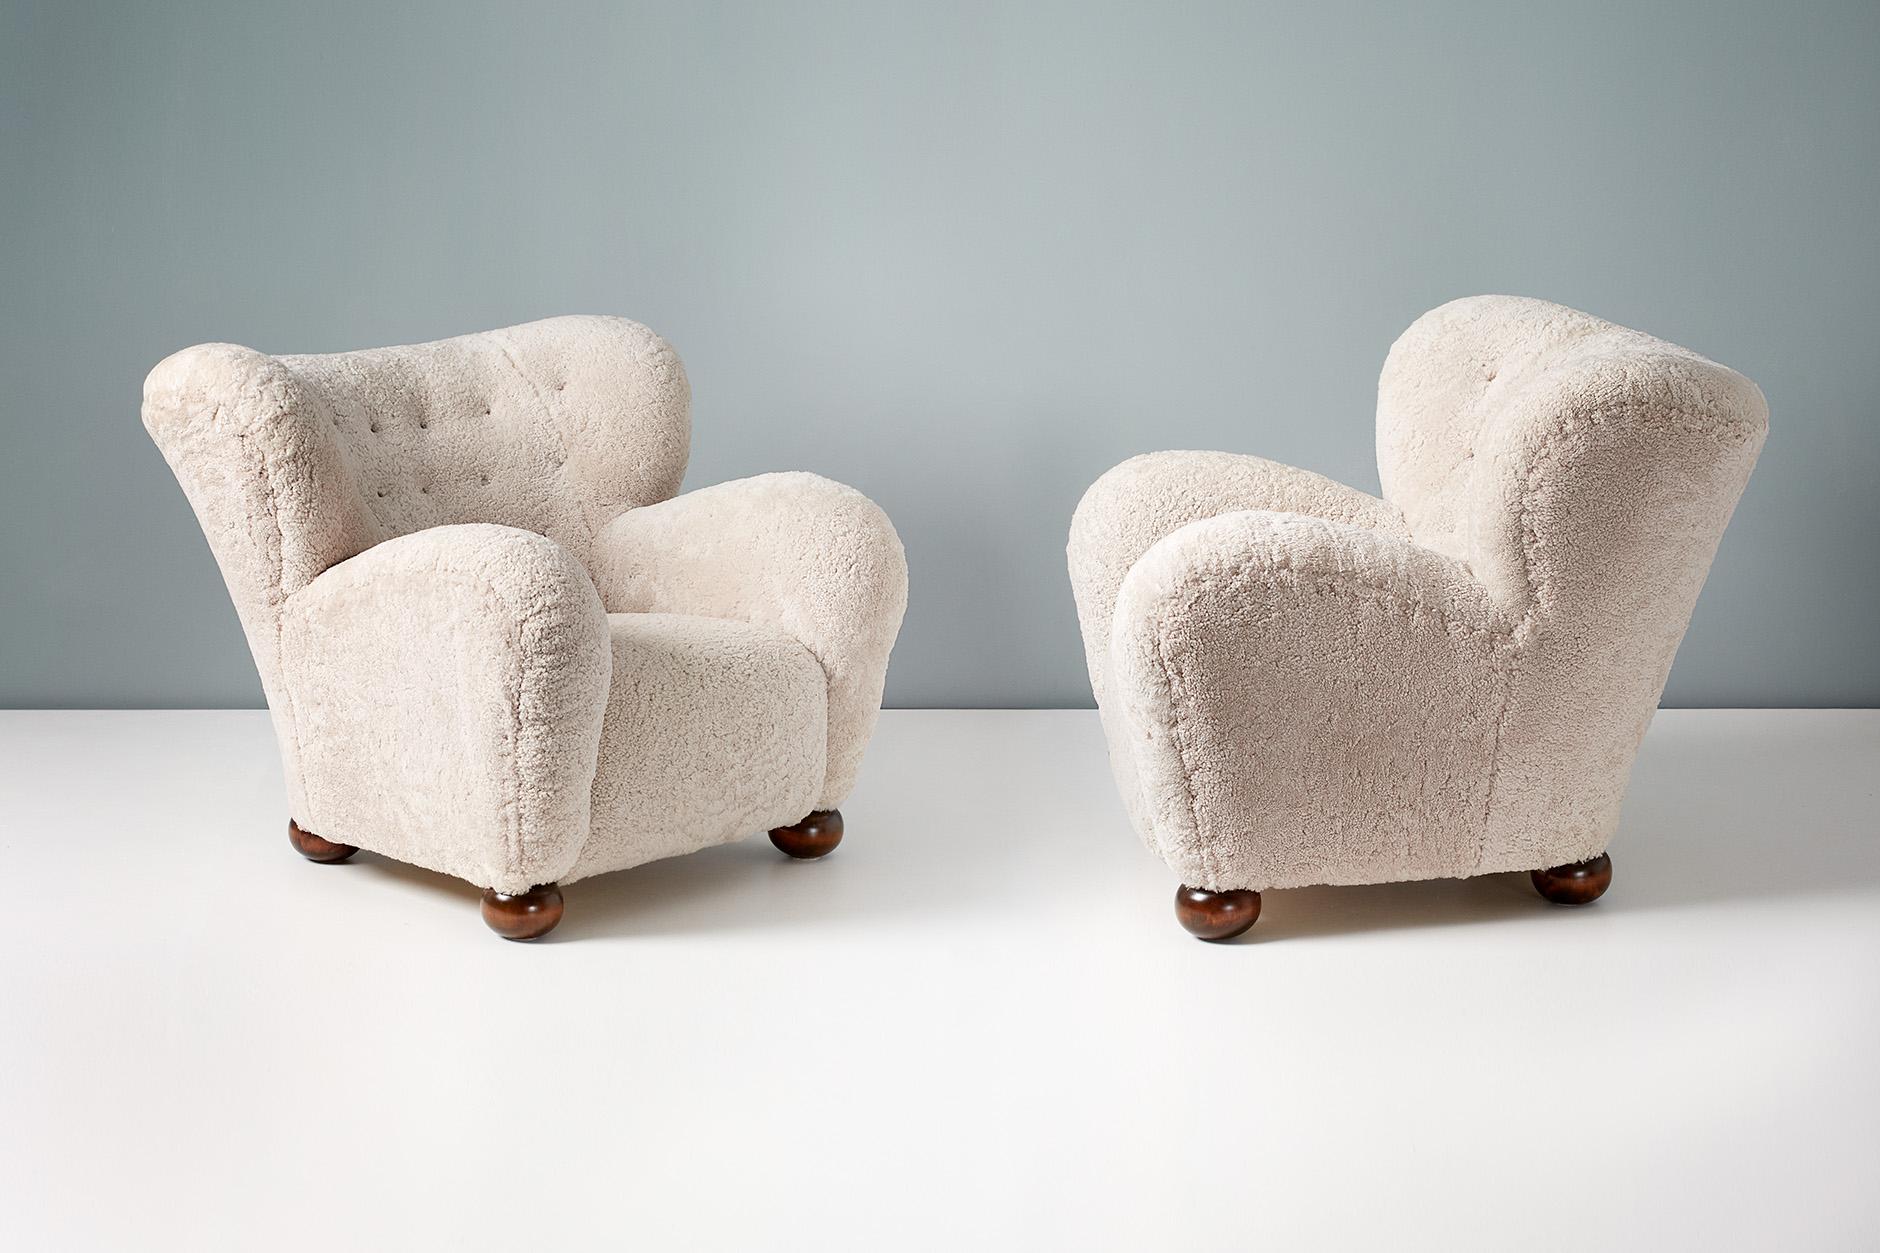 Pair of Marta Blomstedt 1930s Sheepskin Wing Chairs for The Hotel Aulanko 1